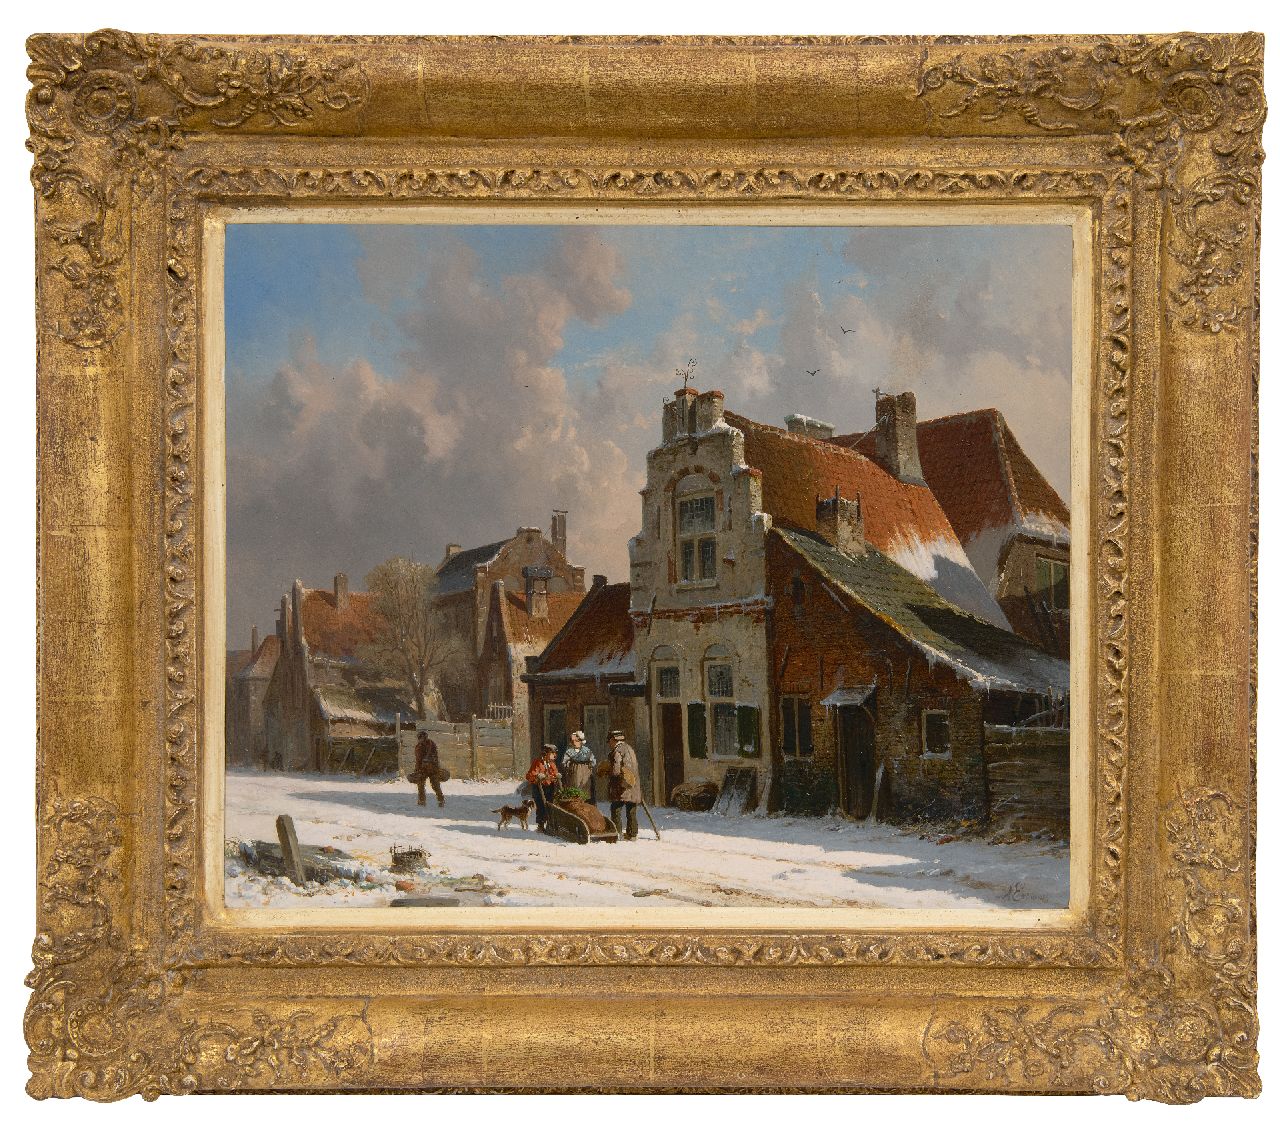 Eversen A.  | Adrianus Eversen, Encounter on a snowy road, oil on panel 33.3 x 41.4 cm, signed l.r. in full and with Monogram